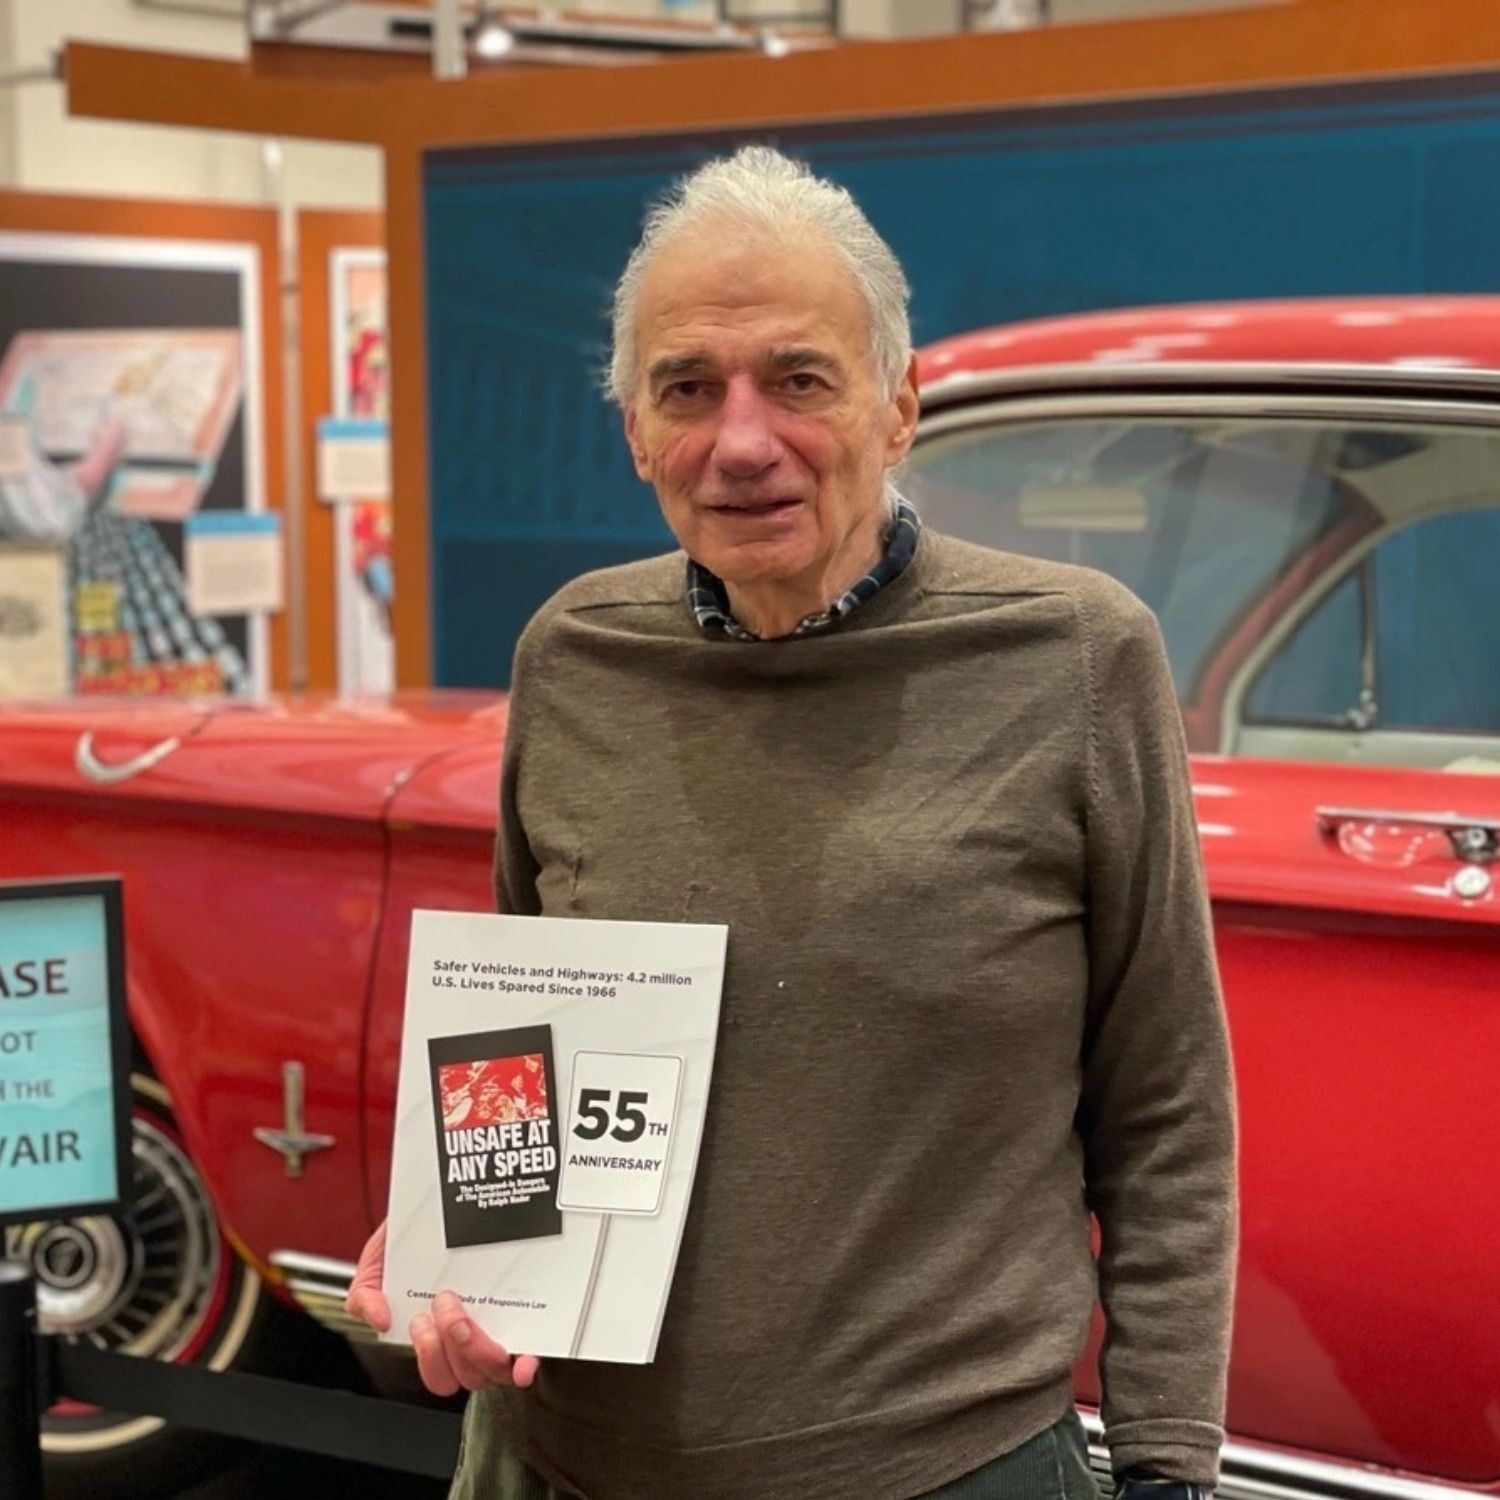 656: Ralph Nader Reflects On His Auto Safety Campaign, 55 Years Later